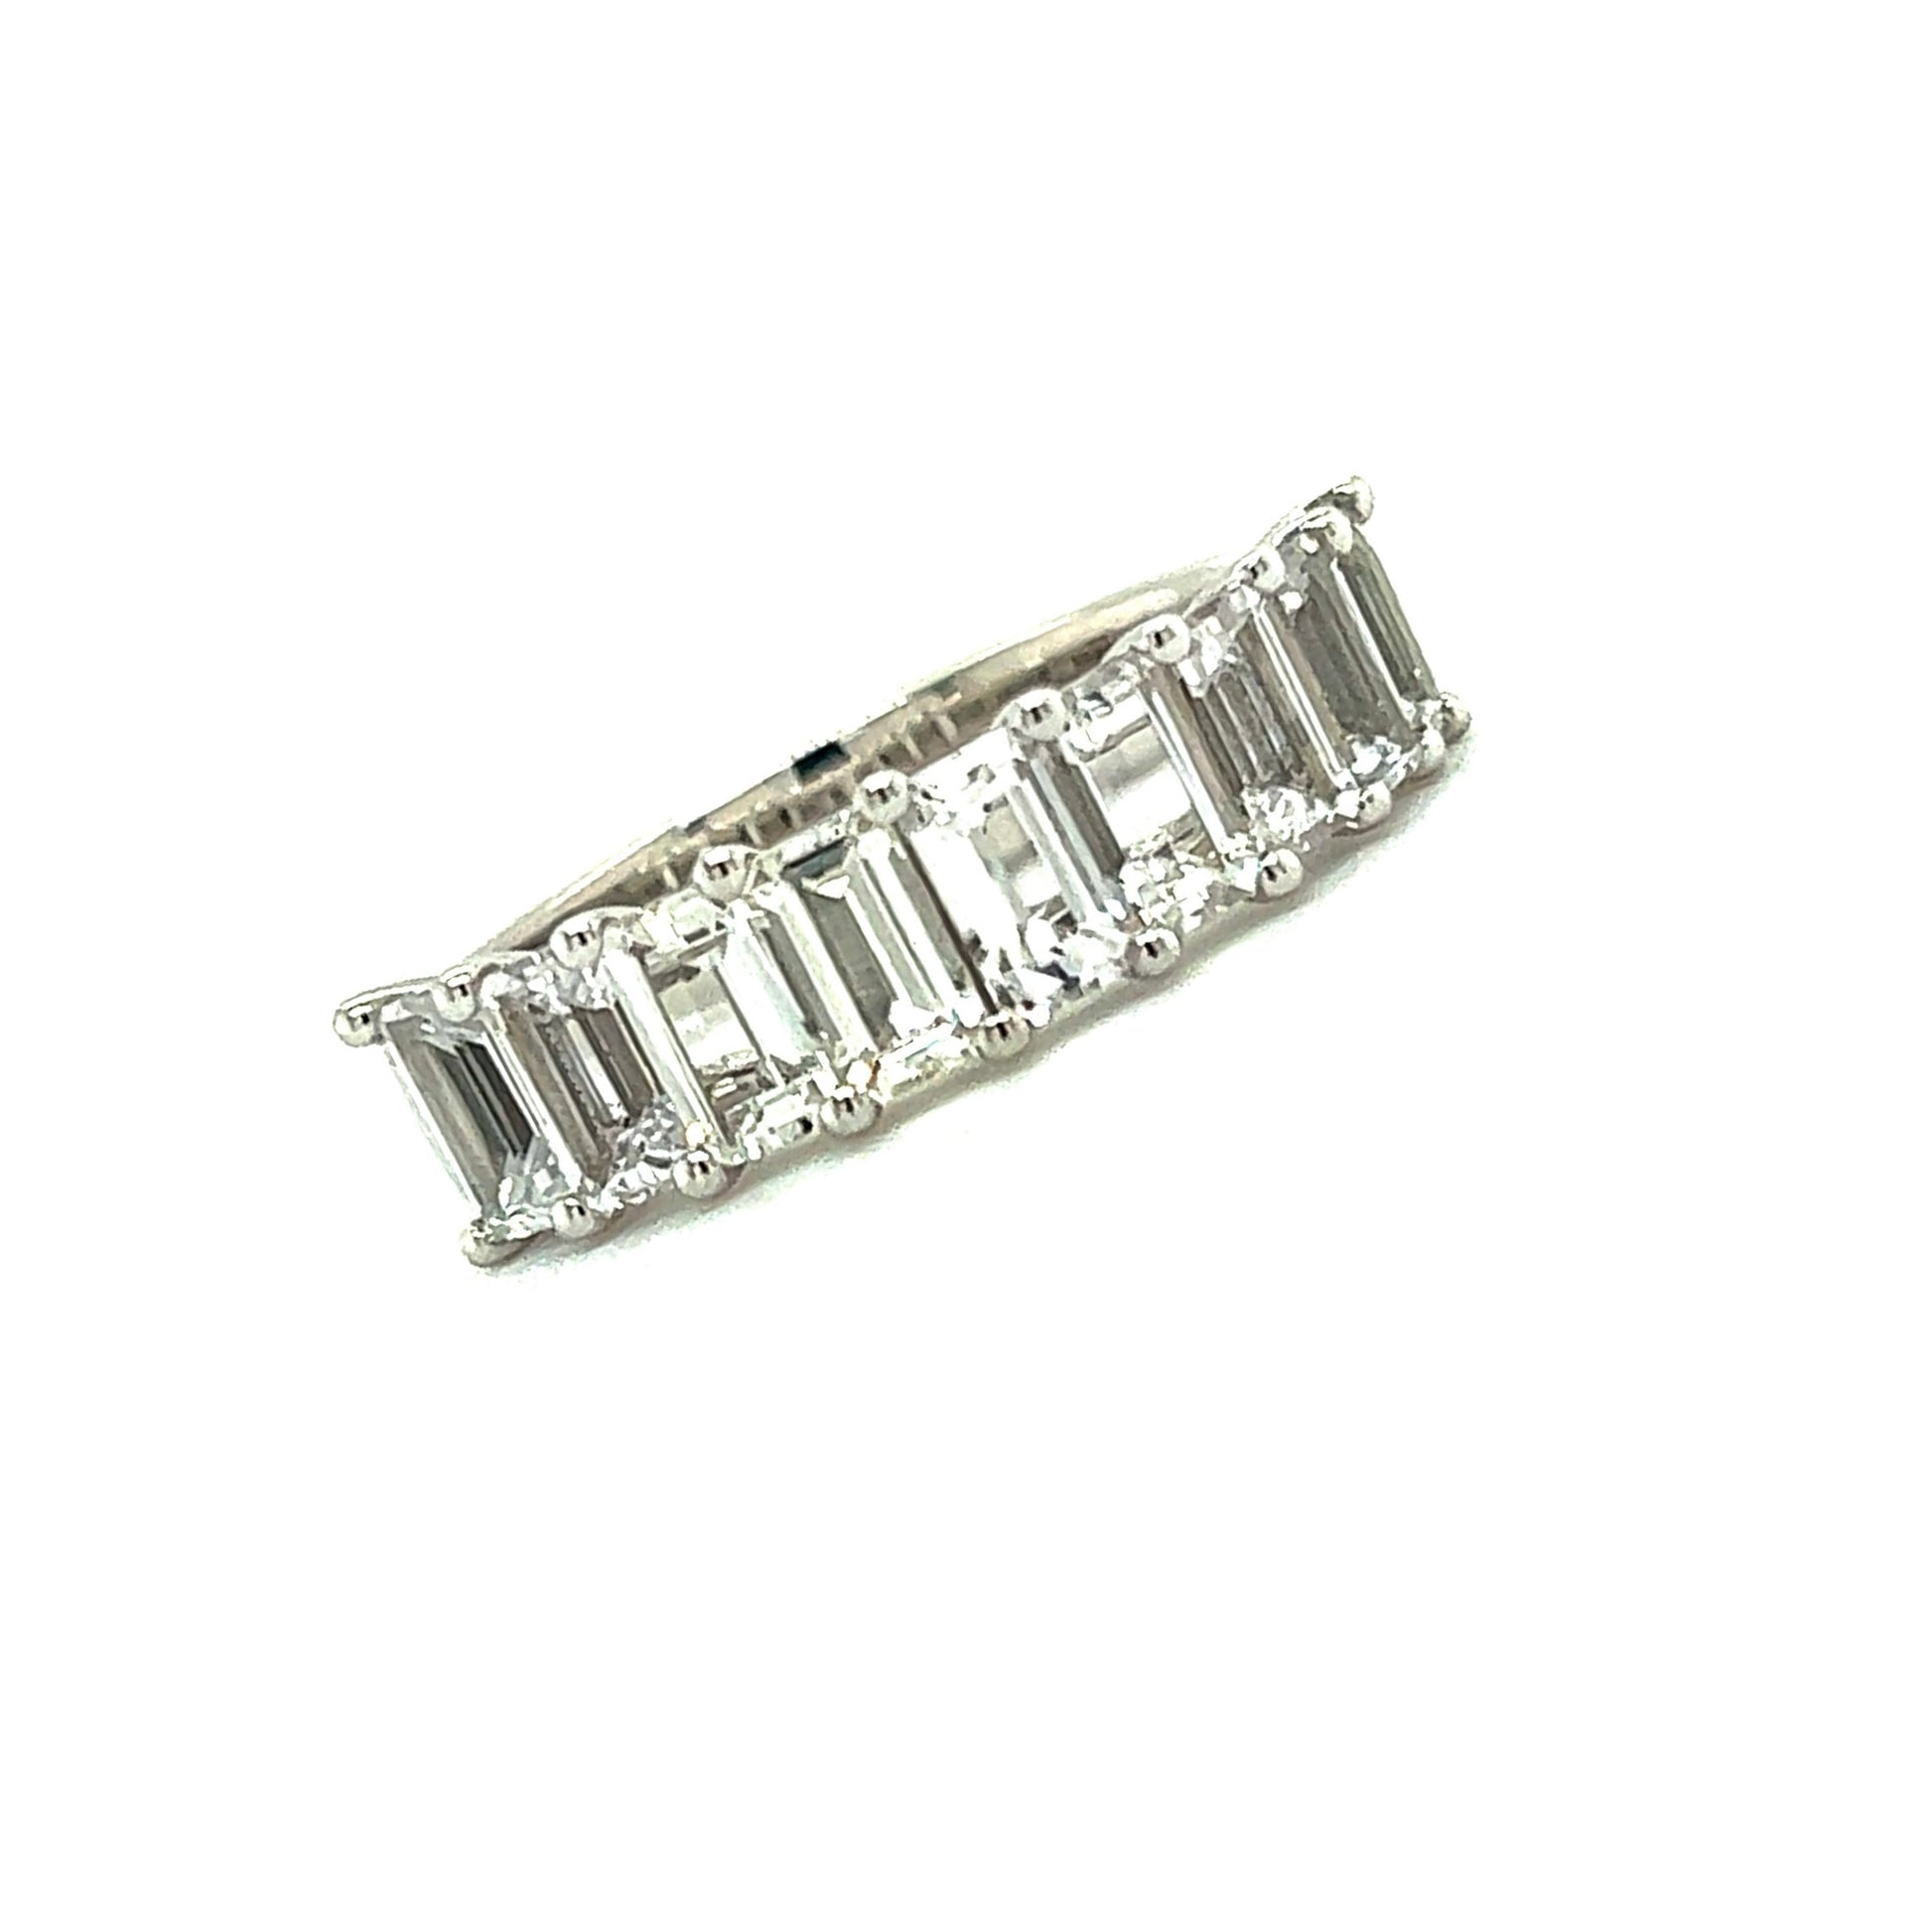 Natural White Sapphire Ring Size 6.5 14k W Gold 4.32 TCW Certified $5,950 216686 - Certified Fine Jewelry